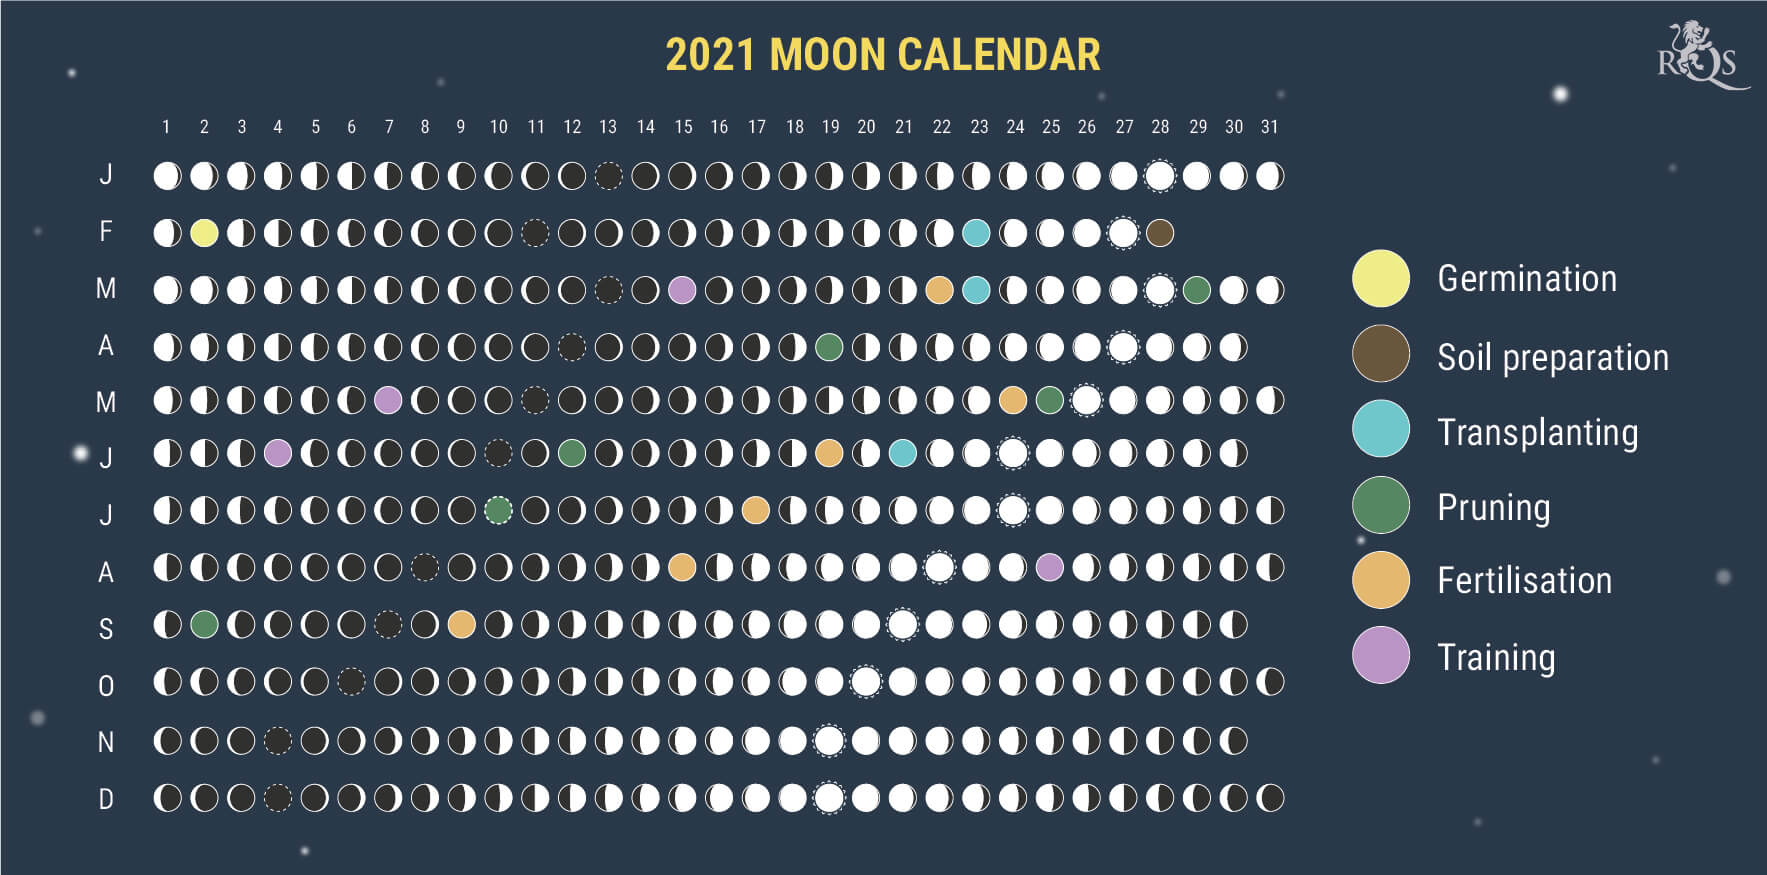 How To Use the 2021 Lunar Calendar During the Growing Season